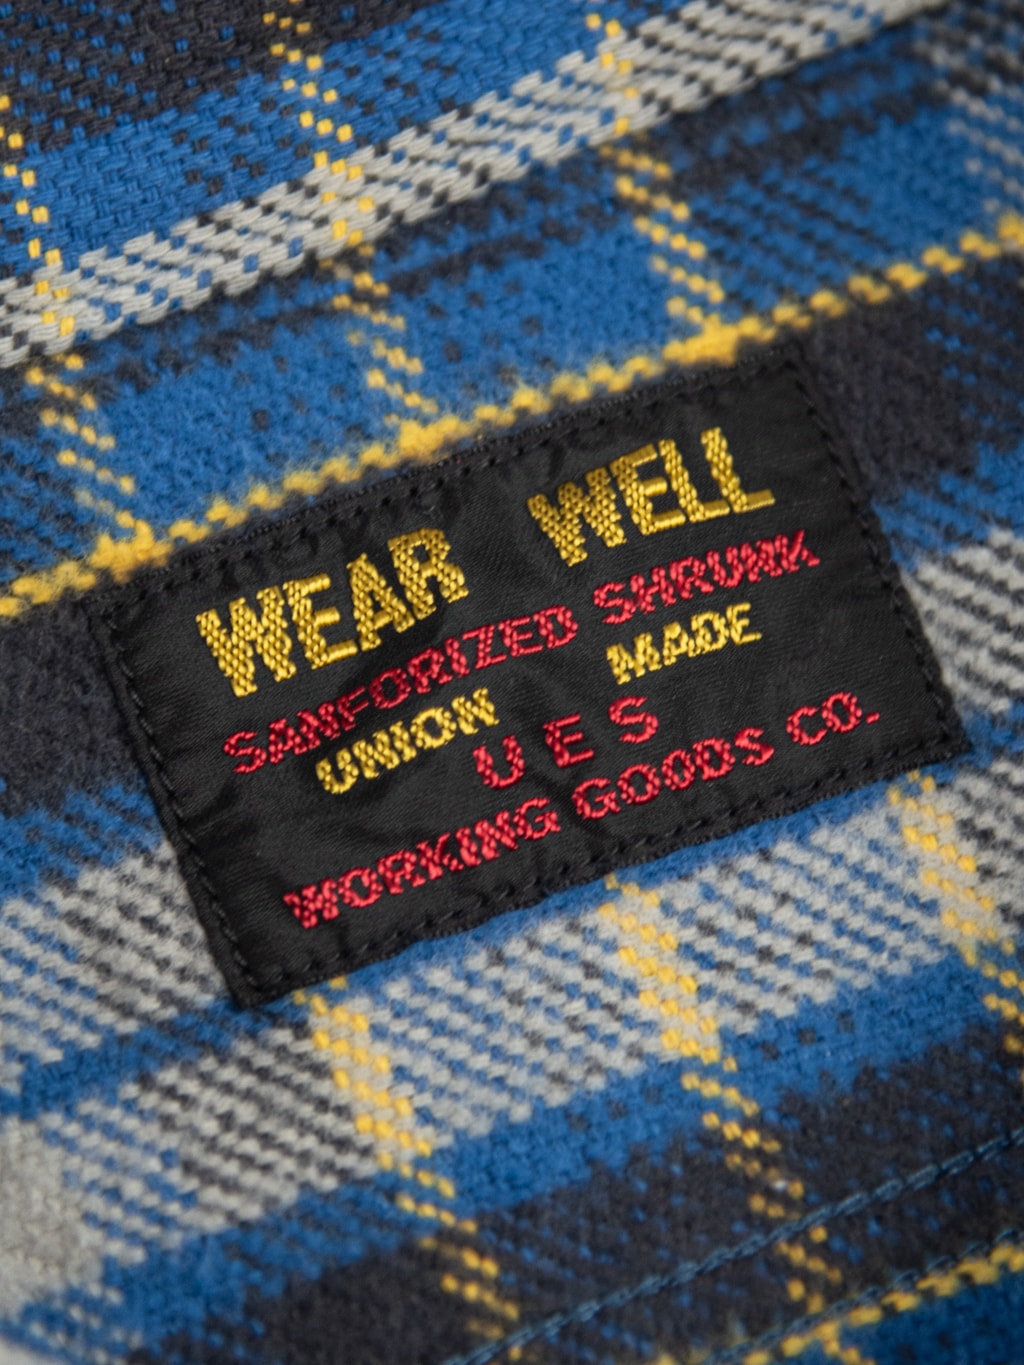 UES Heavy selvedge Flannel Shirt Blue brand interior tag